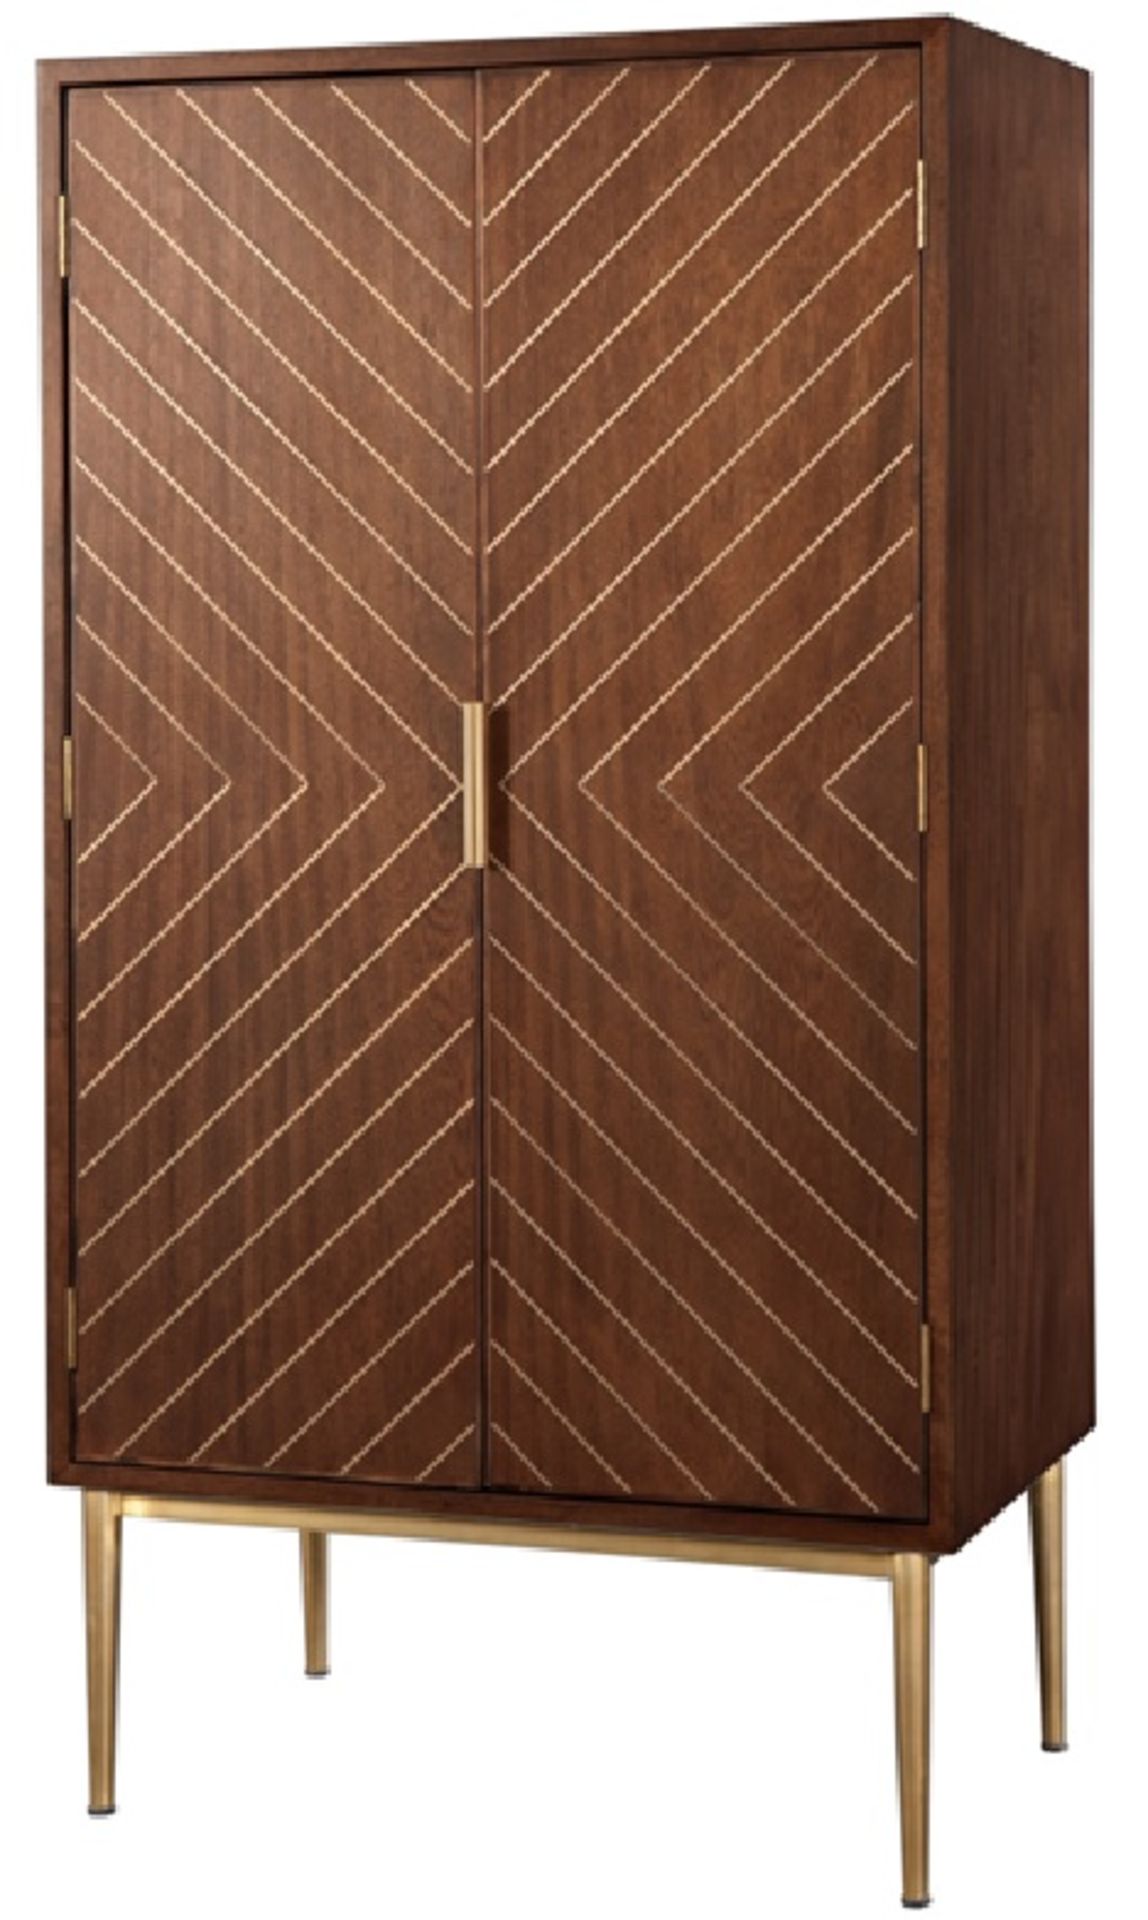 Melrose Cocktail Cabinet The Melrose is a mid-century inspired 2 door cabinet offering clean lines